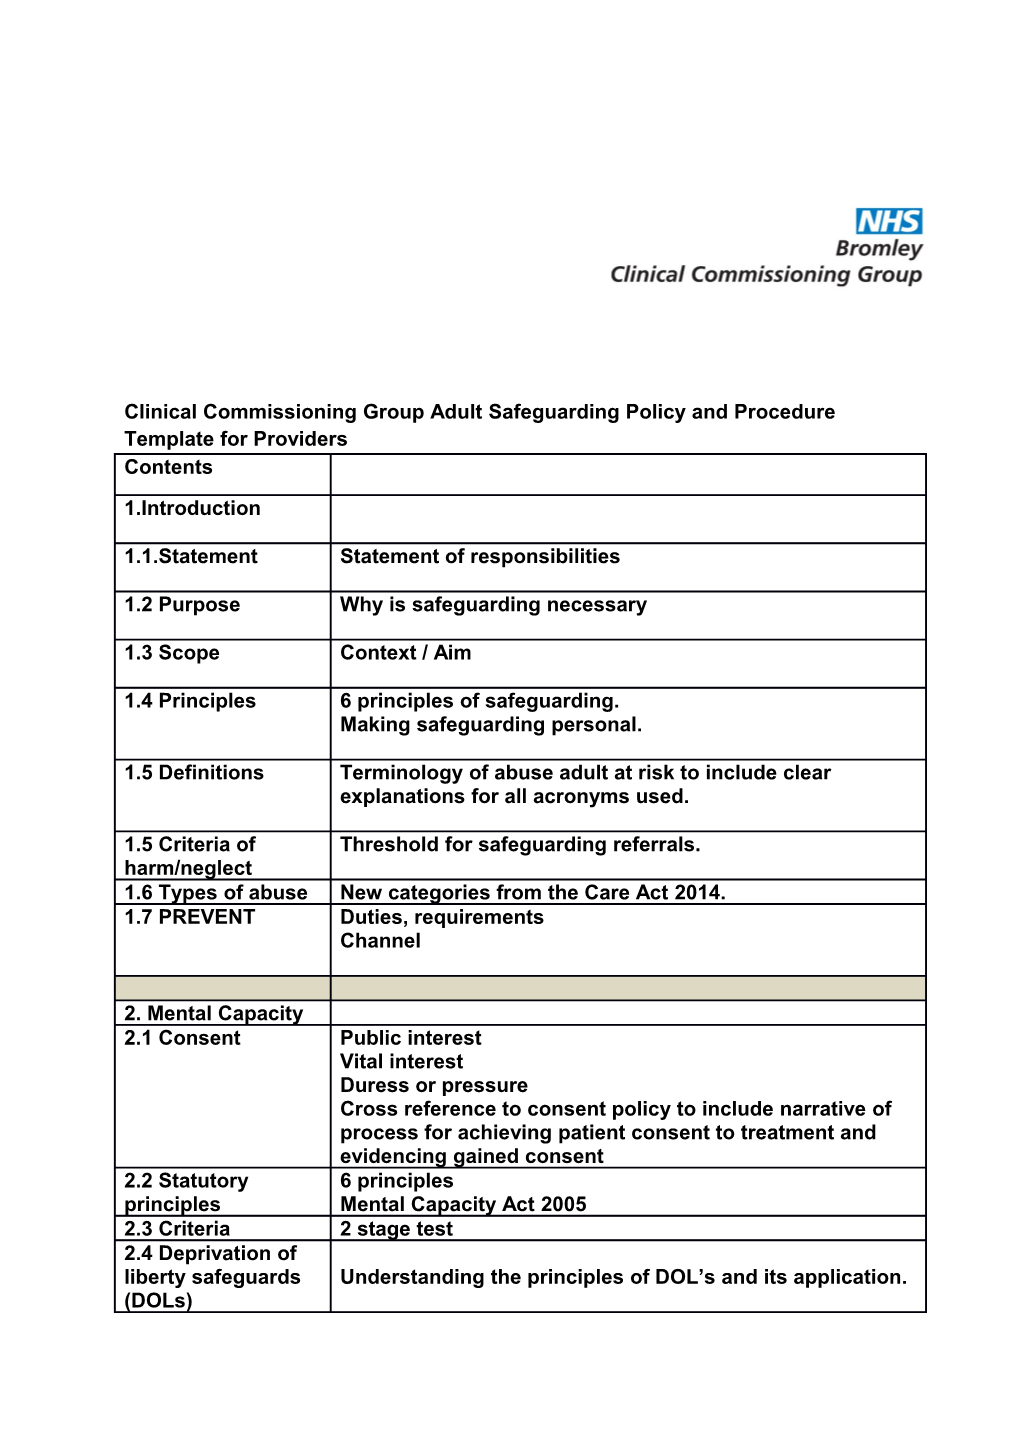 Clinical Commissioning Group Adult Safeguarding Policy and Proceduretemplate for Providers